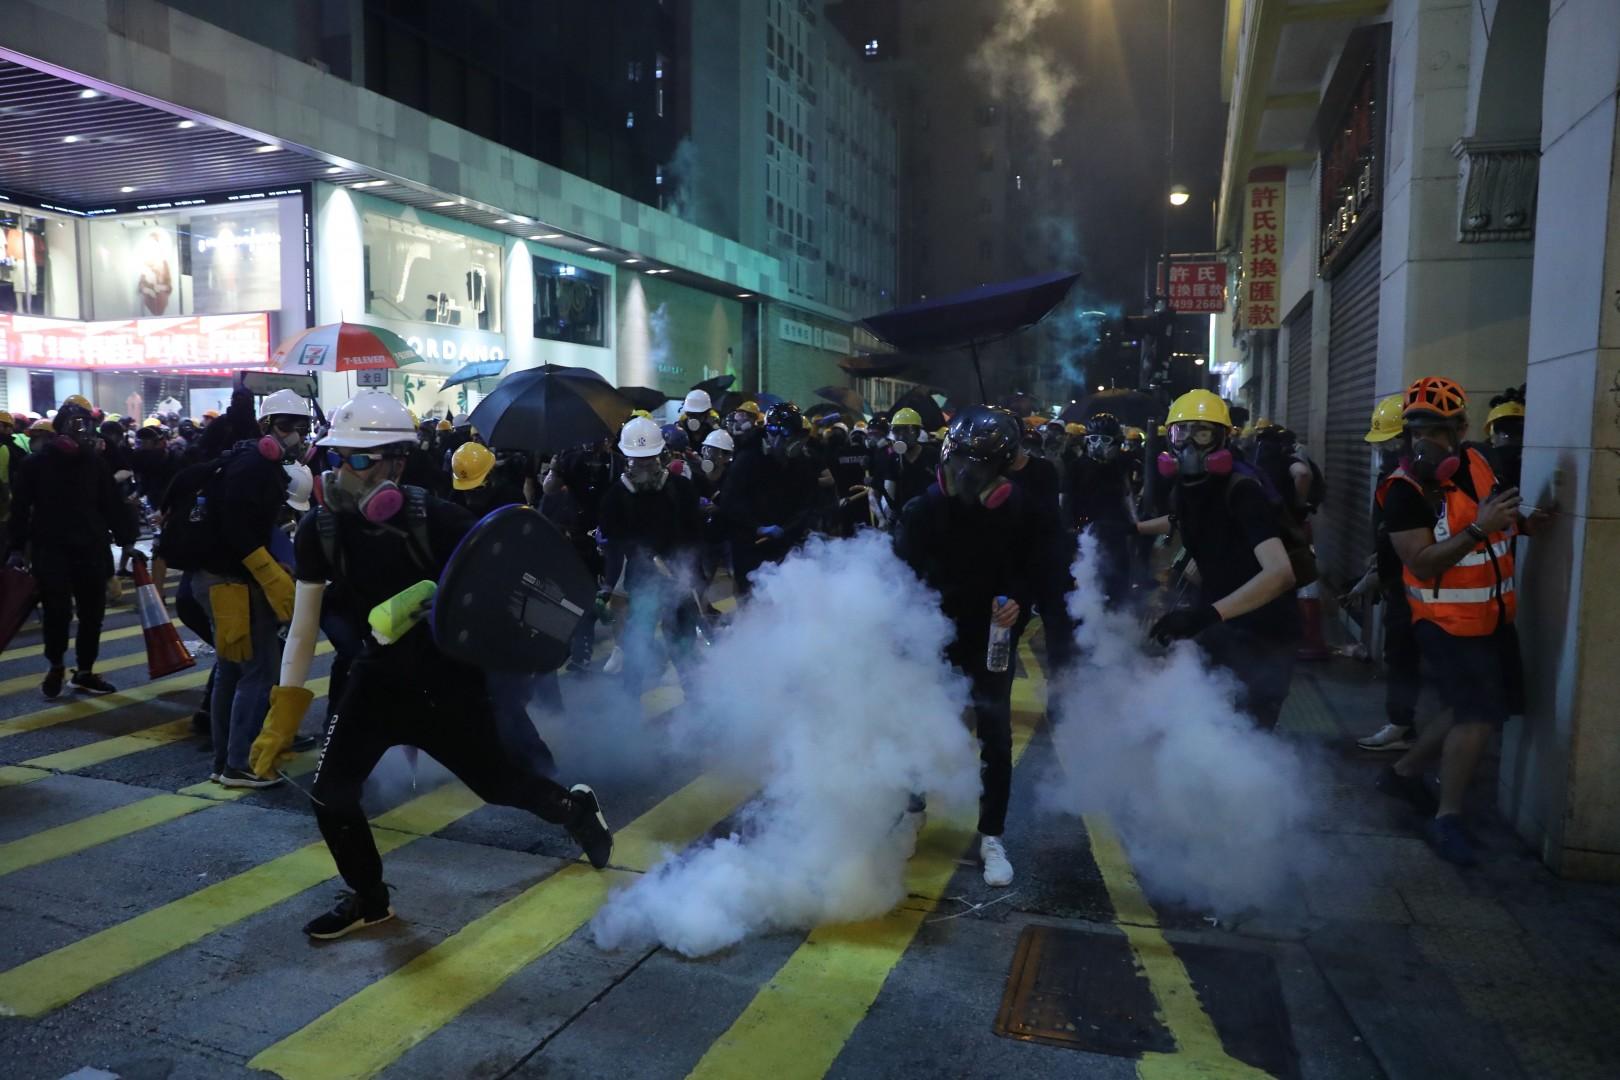 Rioters block traffic, attack passers-by in Hong Kong